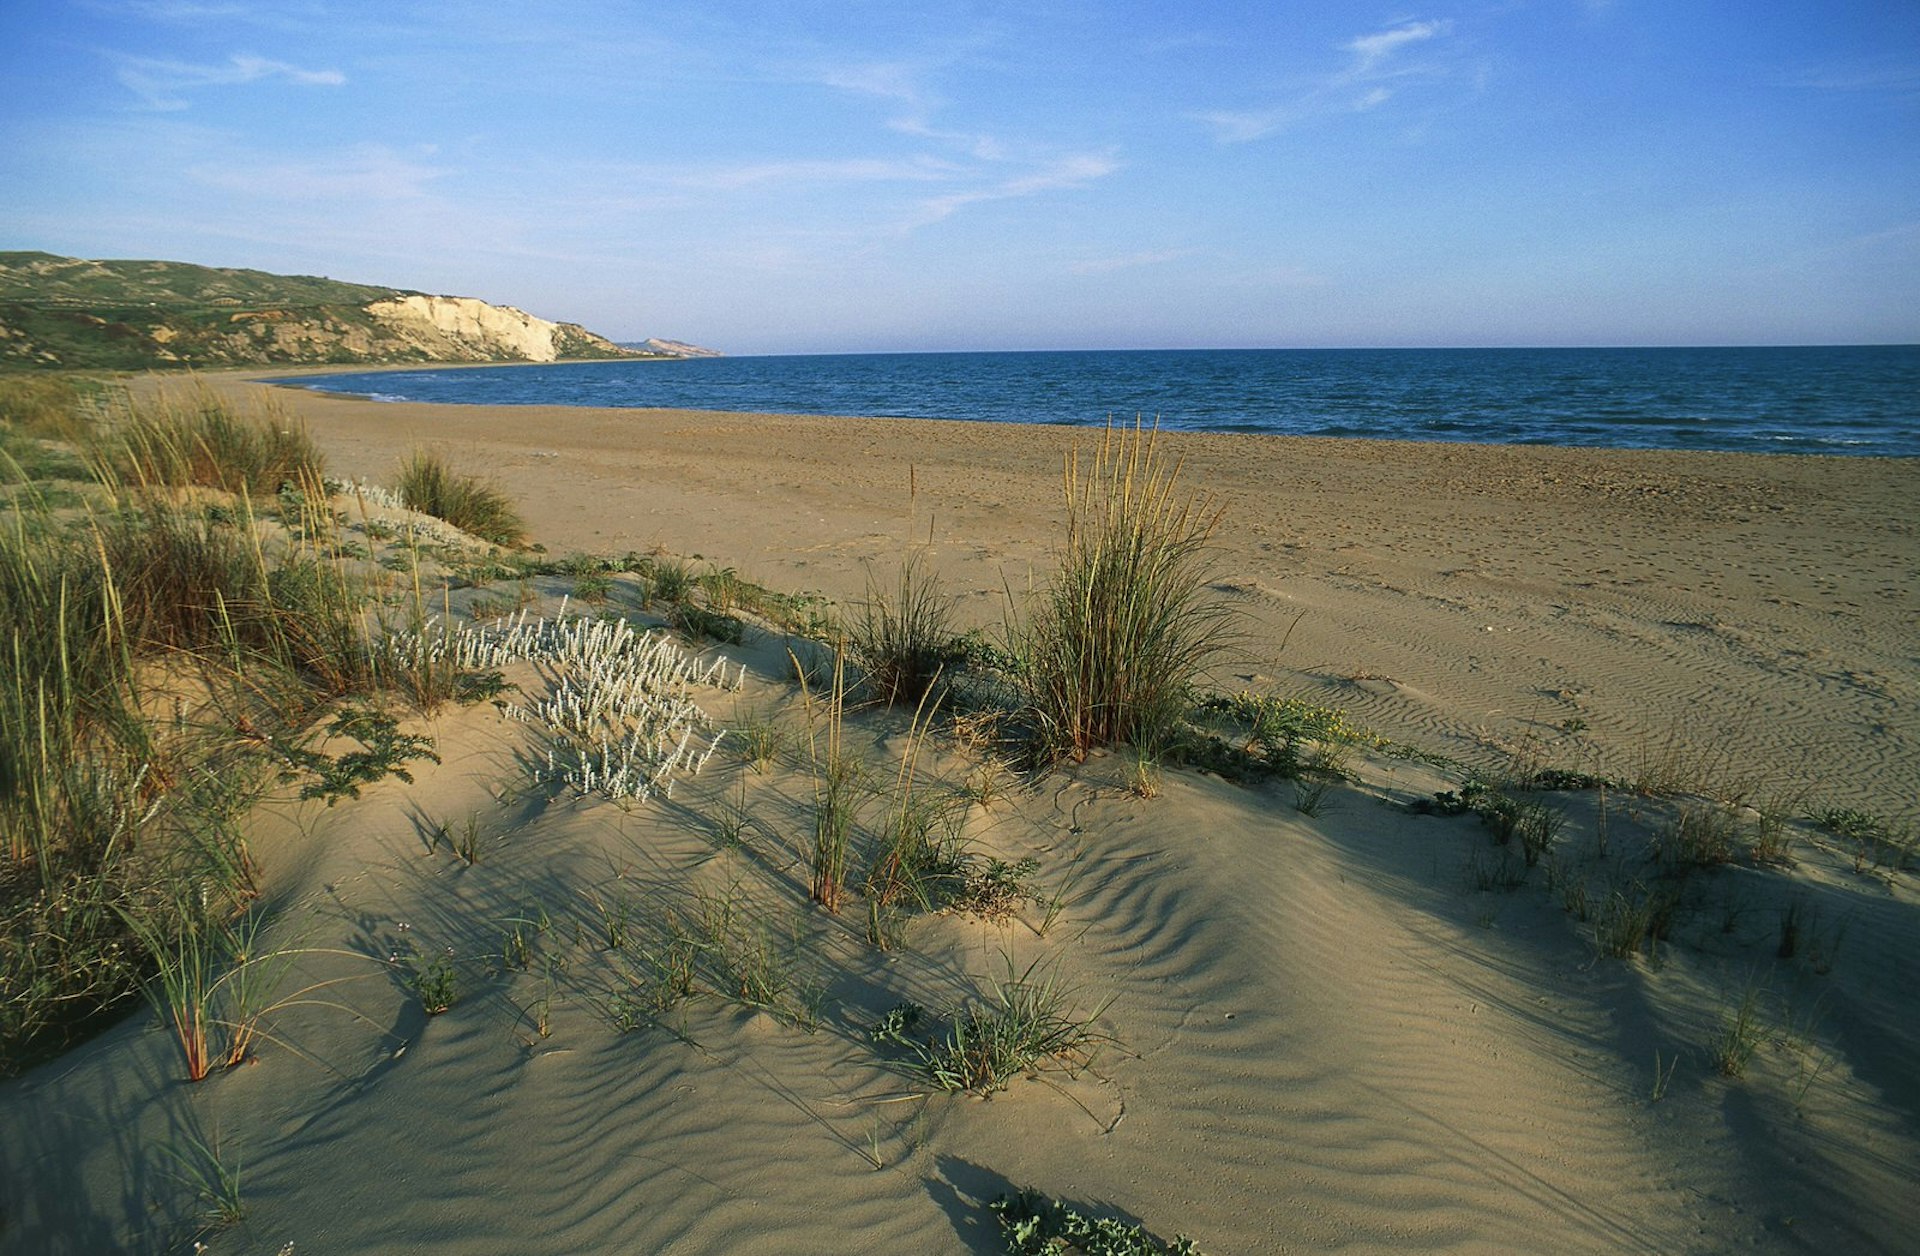 The expansive Torre Salsa beach, with grassy dunes in the foreground and a white headland in the far distance. The sand is golden and the water is dark blue.